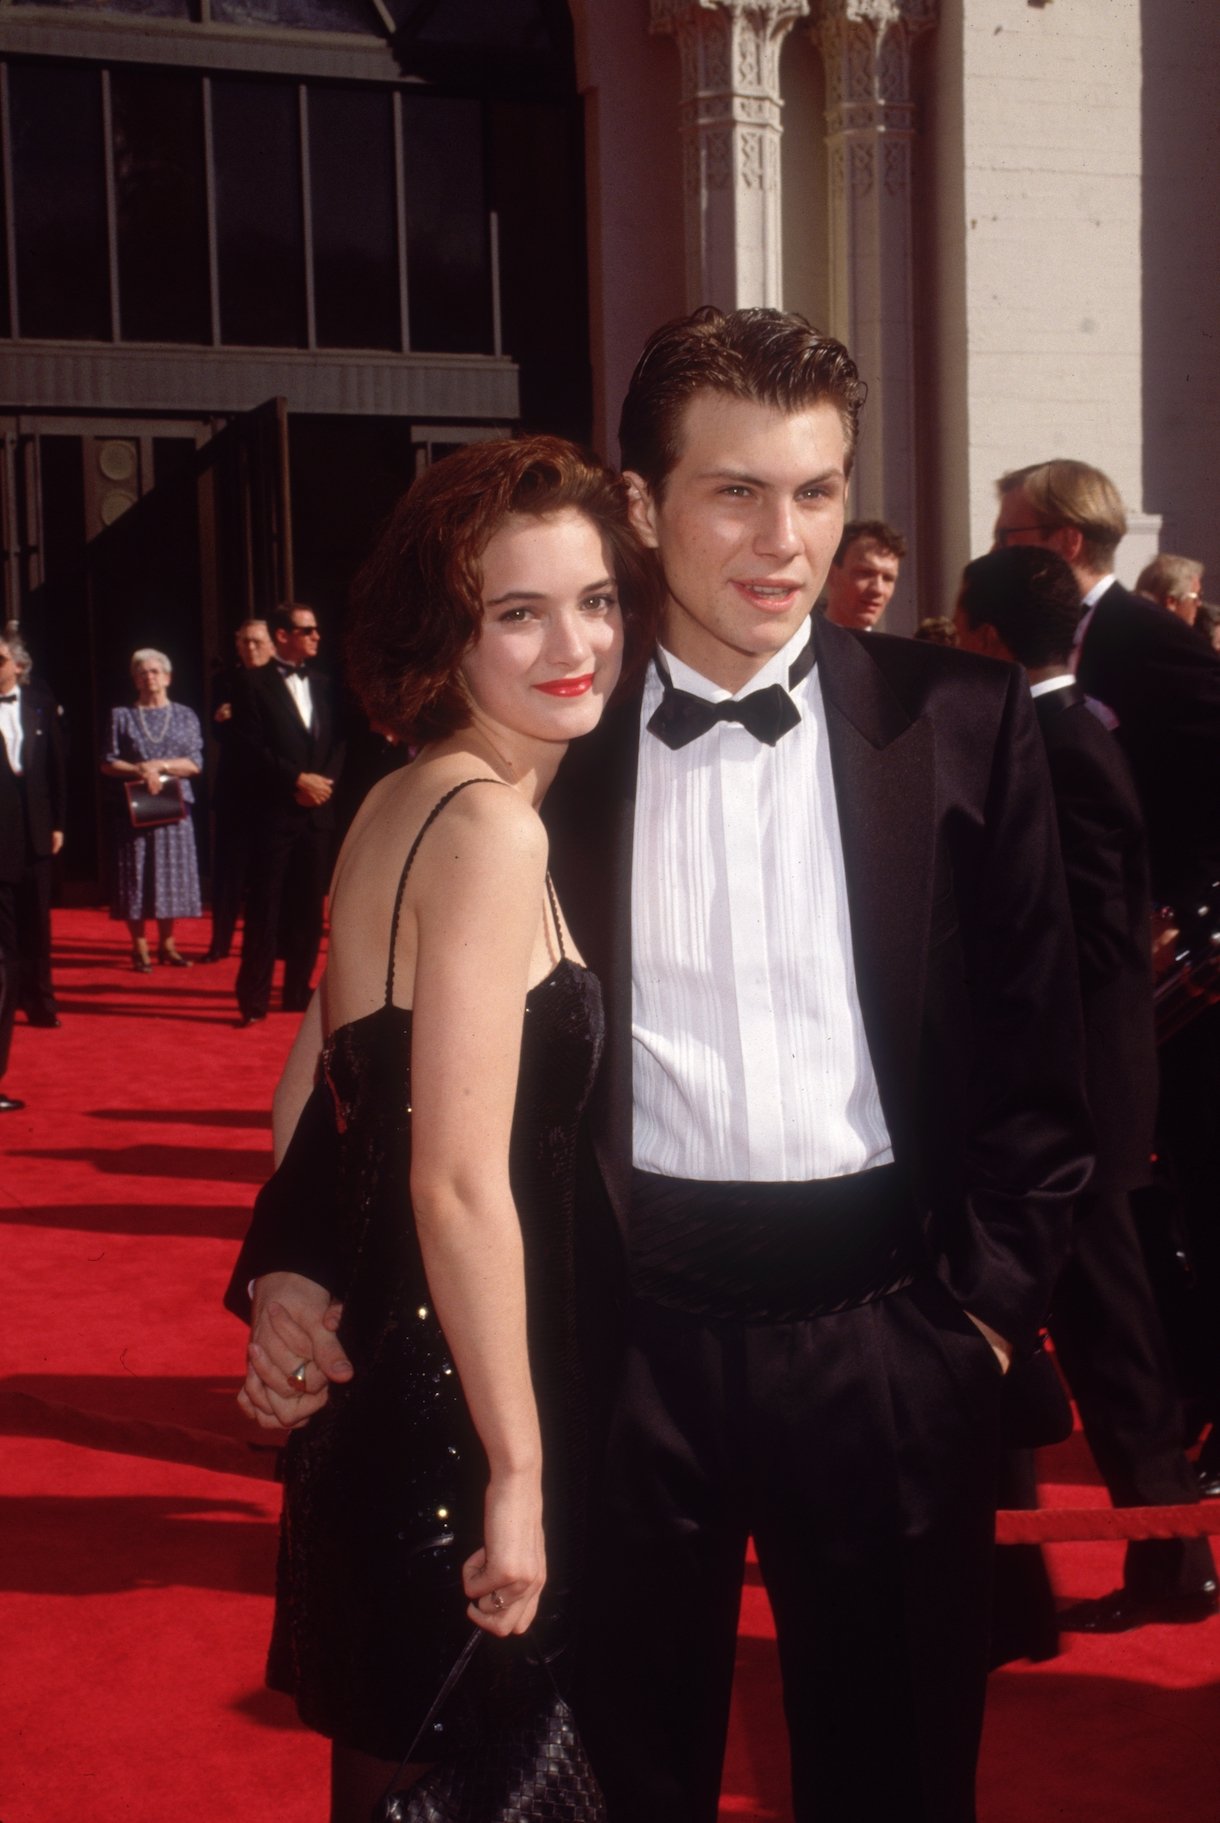 1989: American actors Christian Slater and Winona Ryder pose while holding hands on the red carpet, as they attend the Academy Awards